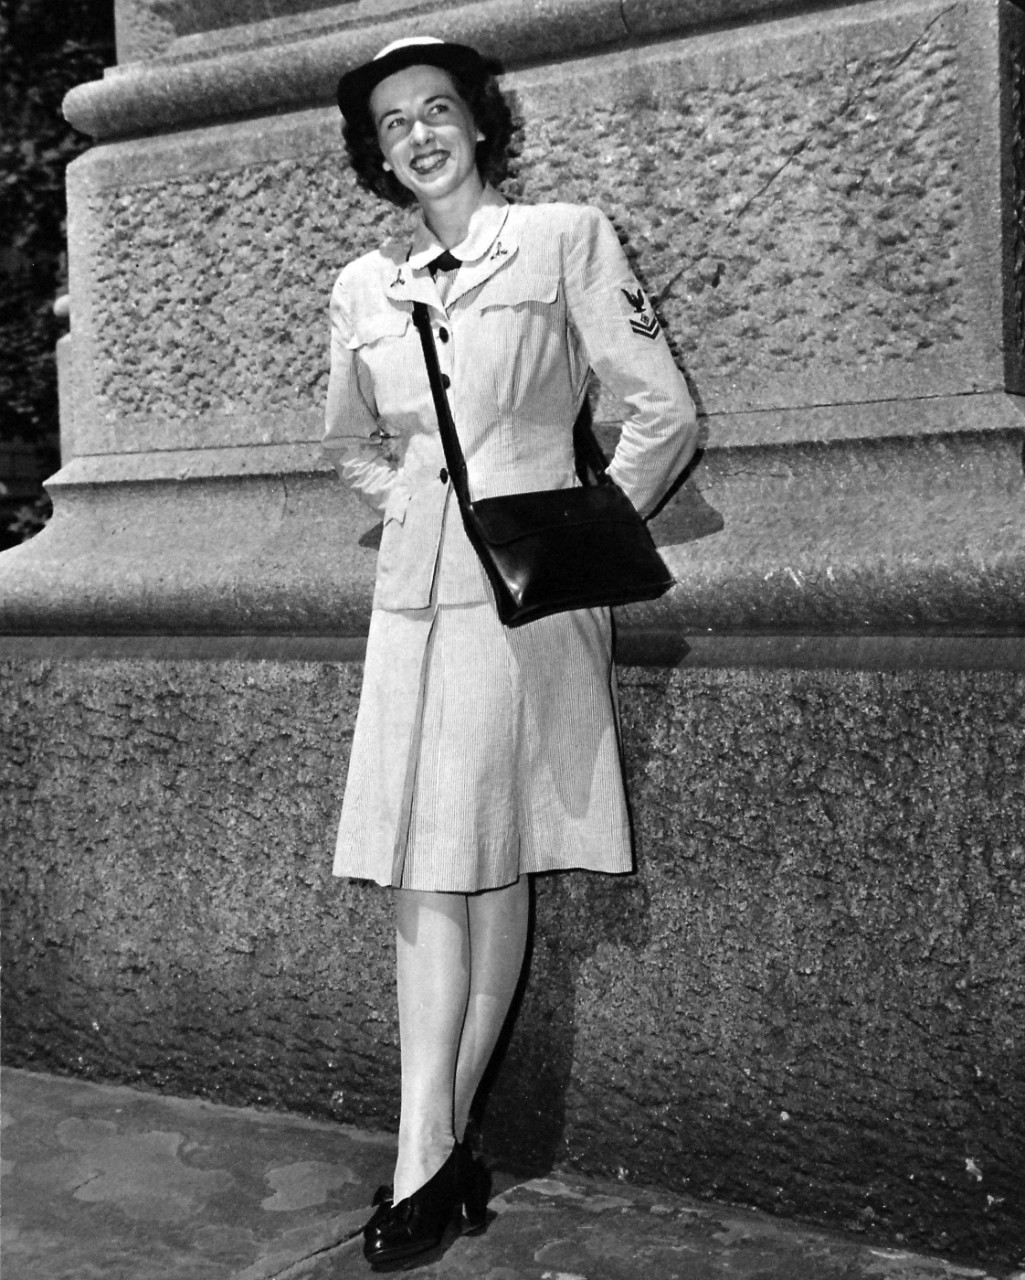 80-G-46608:  Working Uniform (front), June 1944.  Correct uniforms worn by enlisted personnel of the Women’s Reserve, U.S. Naval Reserve, are modeled by Specialist (R)2c Jeanne Henry, attached to the Office of Naval Officer Procurement, in New York City.  This uniform consists of a gray and white cotton seersucker dress with matching jacket and hat cover.  The black gloves are optional.   Released June 22, 1944.  U.S. Navy Photograph, now in the collections of the National Archives.  